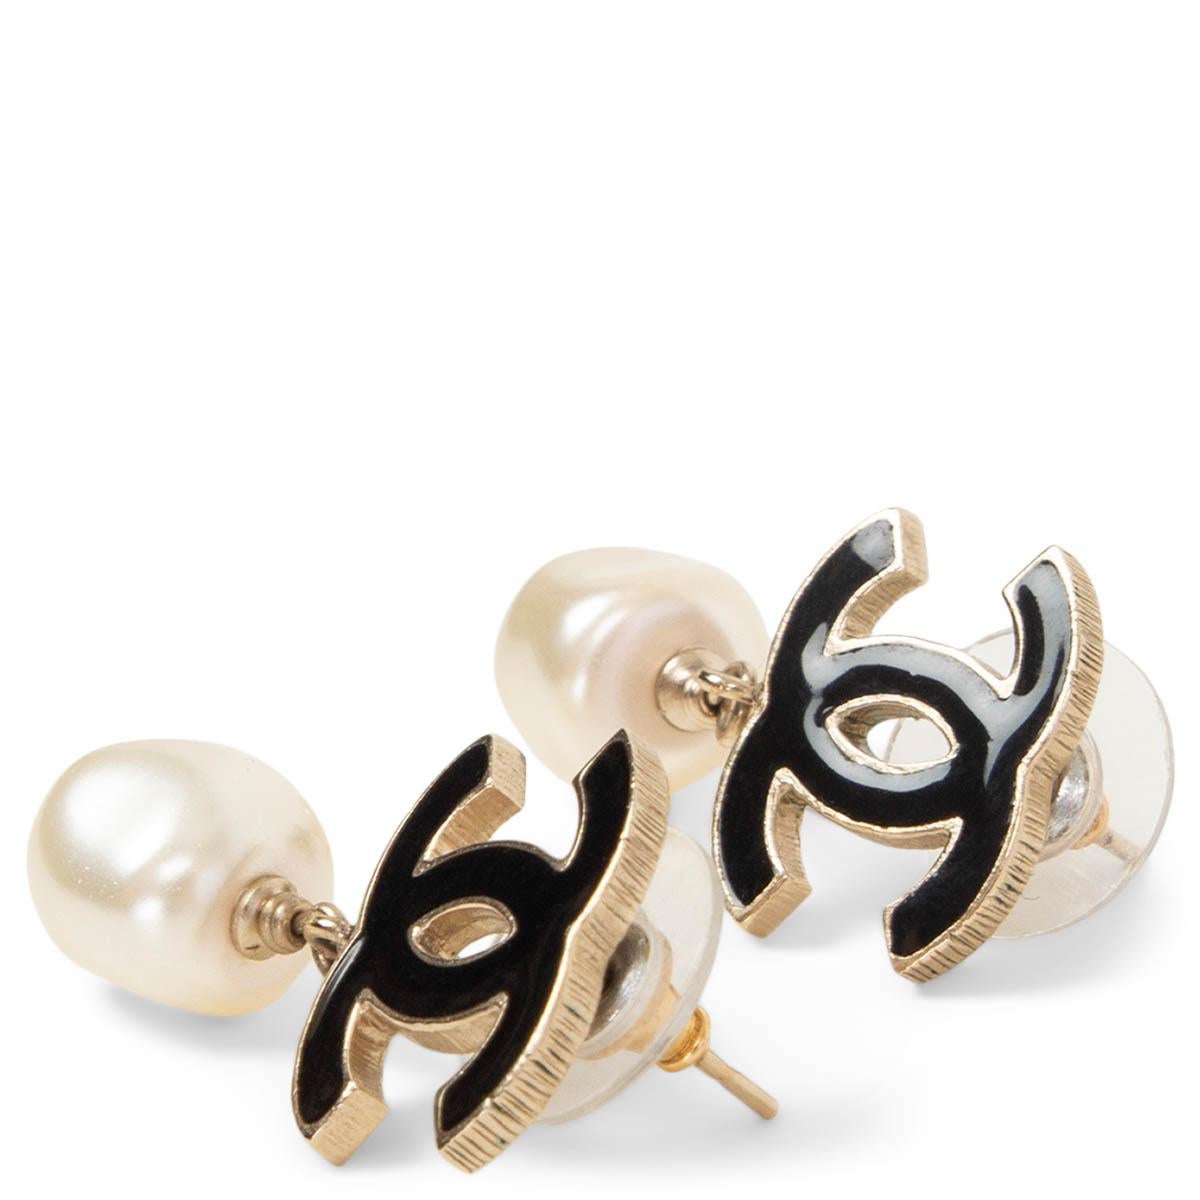 100% authentic Chanel CC enamel logo earring with a hanging off-white faux pearl. Have been worn and are in excellent condition. 

Measurements
Width	1.5cm (0.6in)
Height	2.5cm (1in)
Length	2.5cm (1in)

All our listings include only the listed item